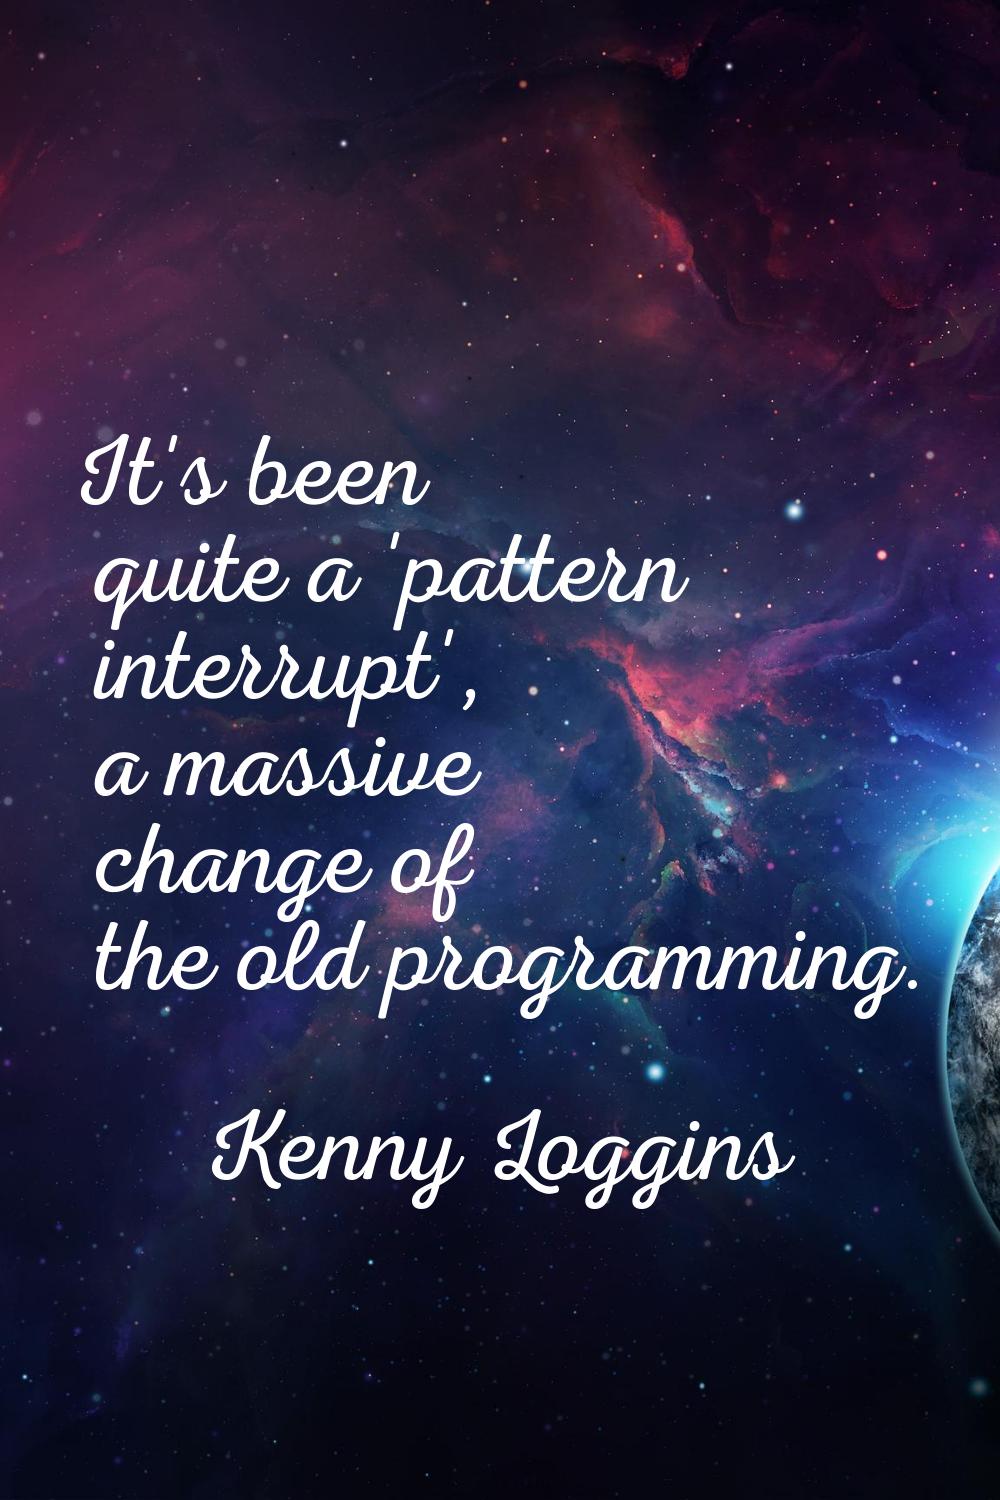 It's been quite a 'pattern interrupt', a massive change of the old programming.